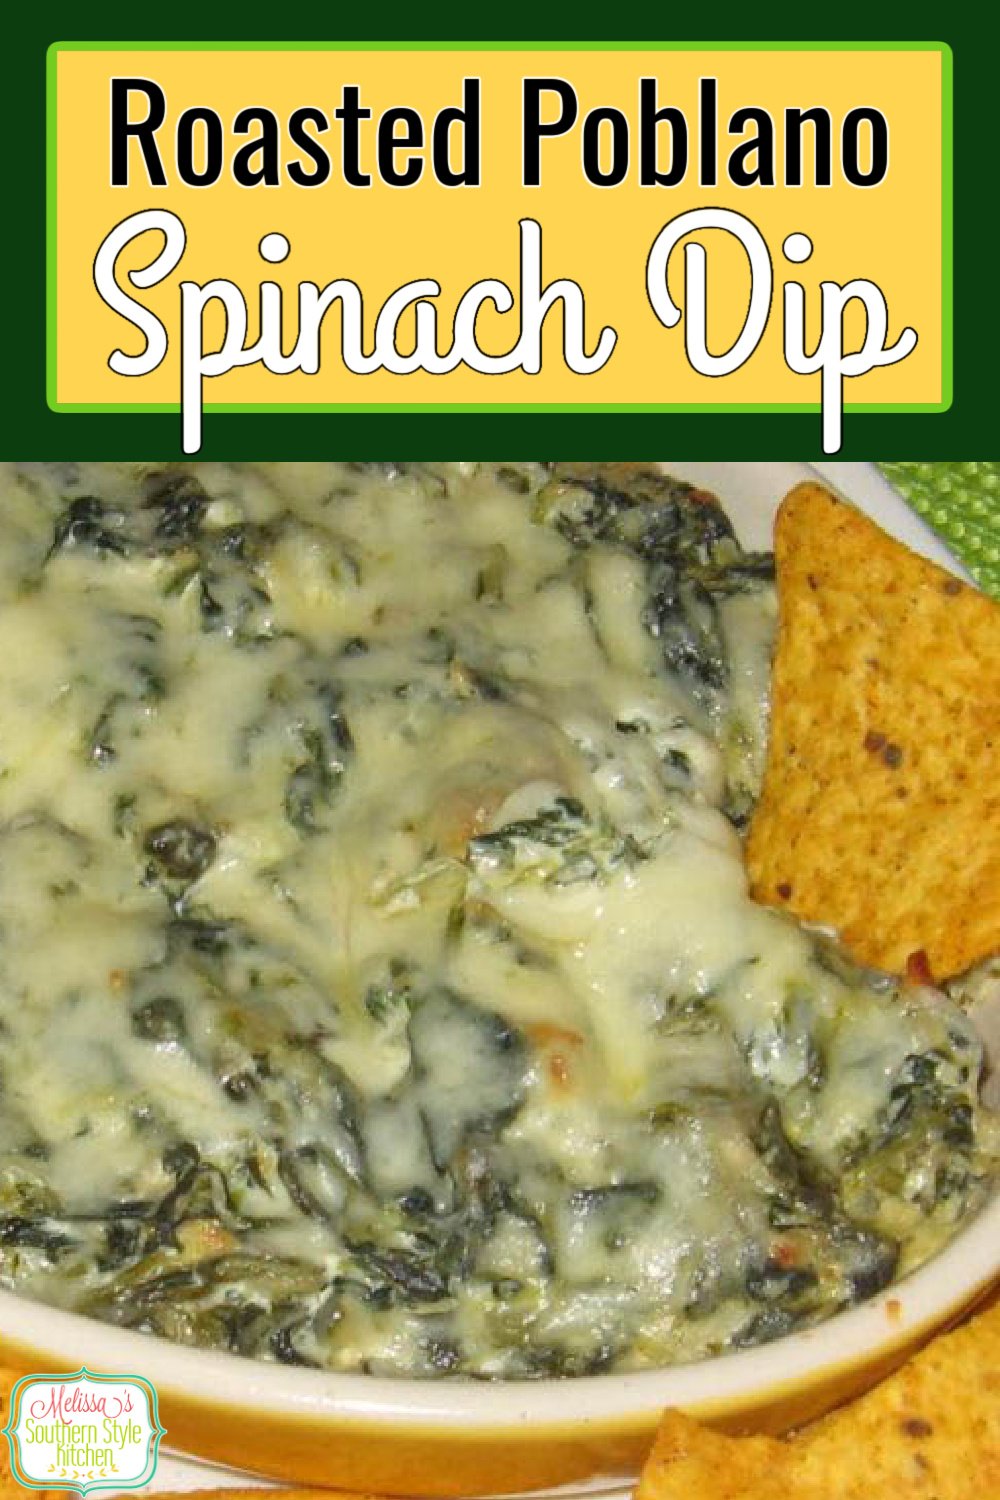 This kickin' Roasted Poblano Spinach Dip is impossible to resist #spinachdip #roastedpoblanos #poblanopeppers #pepperdips #spinachrecipes #apperizers #poblanos #spicydiprecipes via @melissasssk